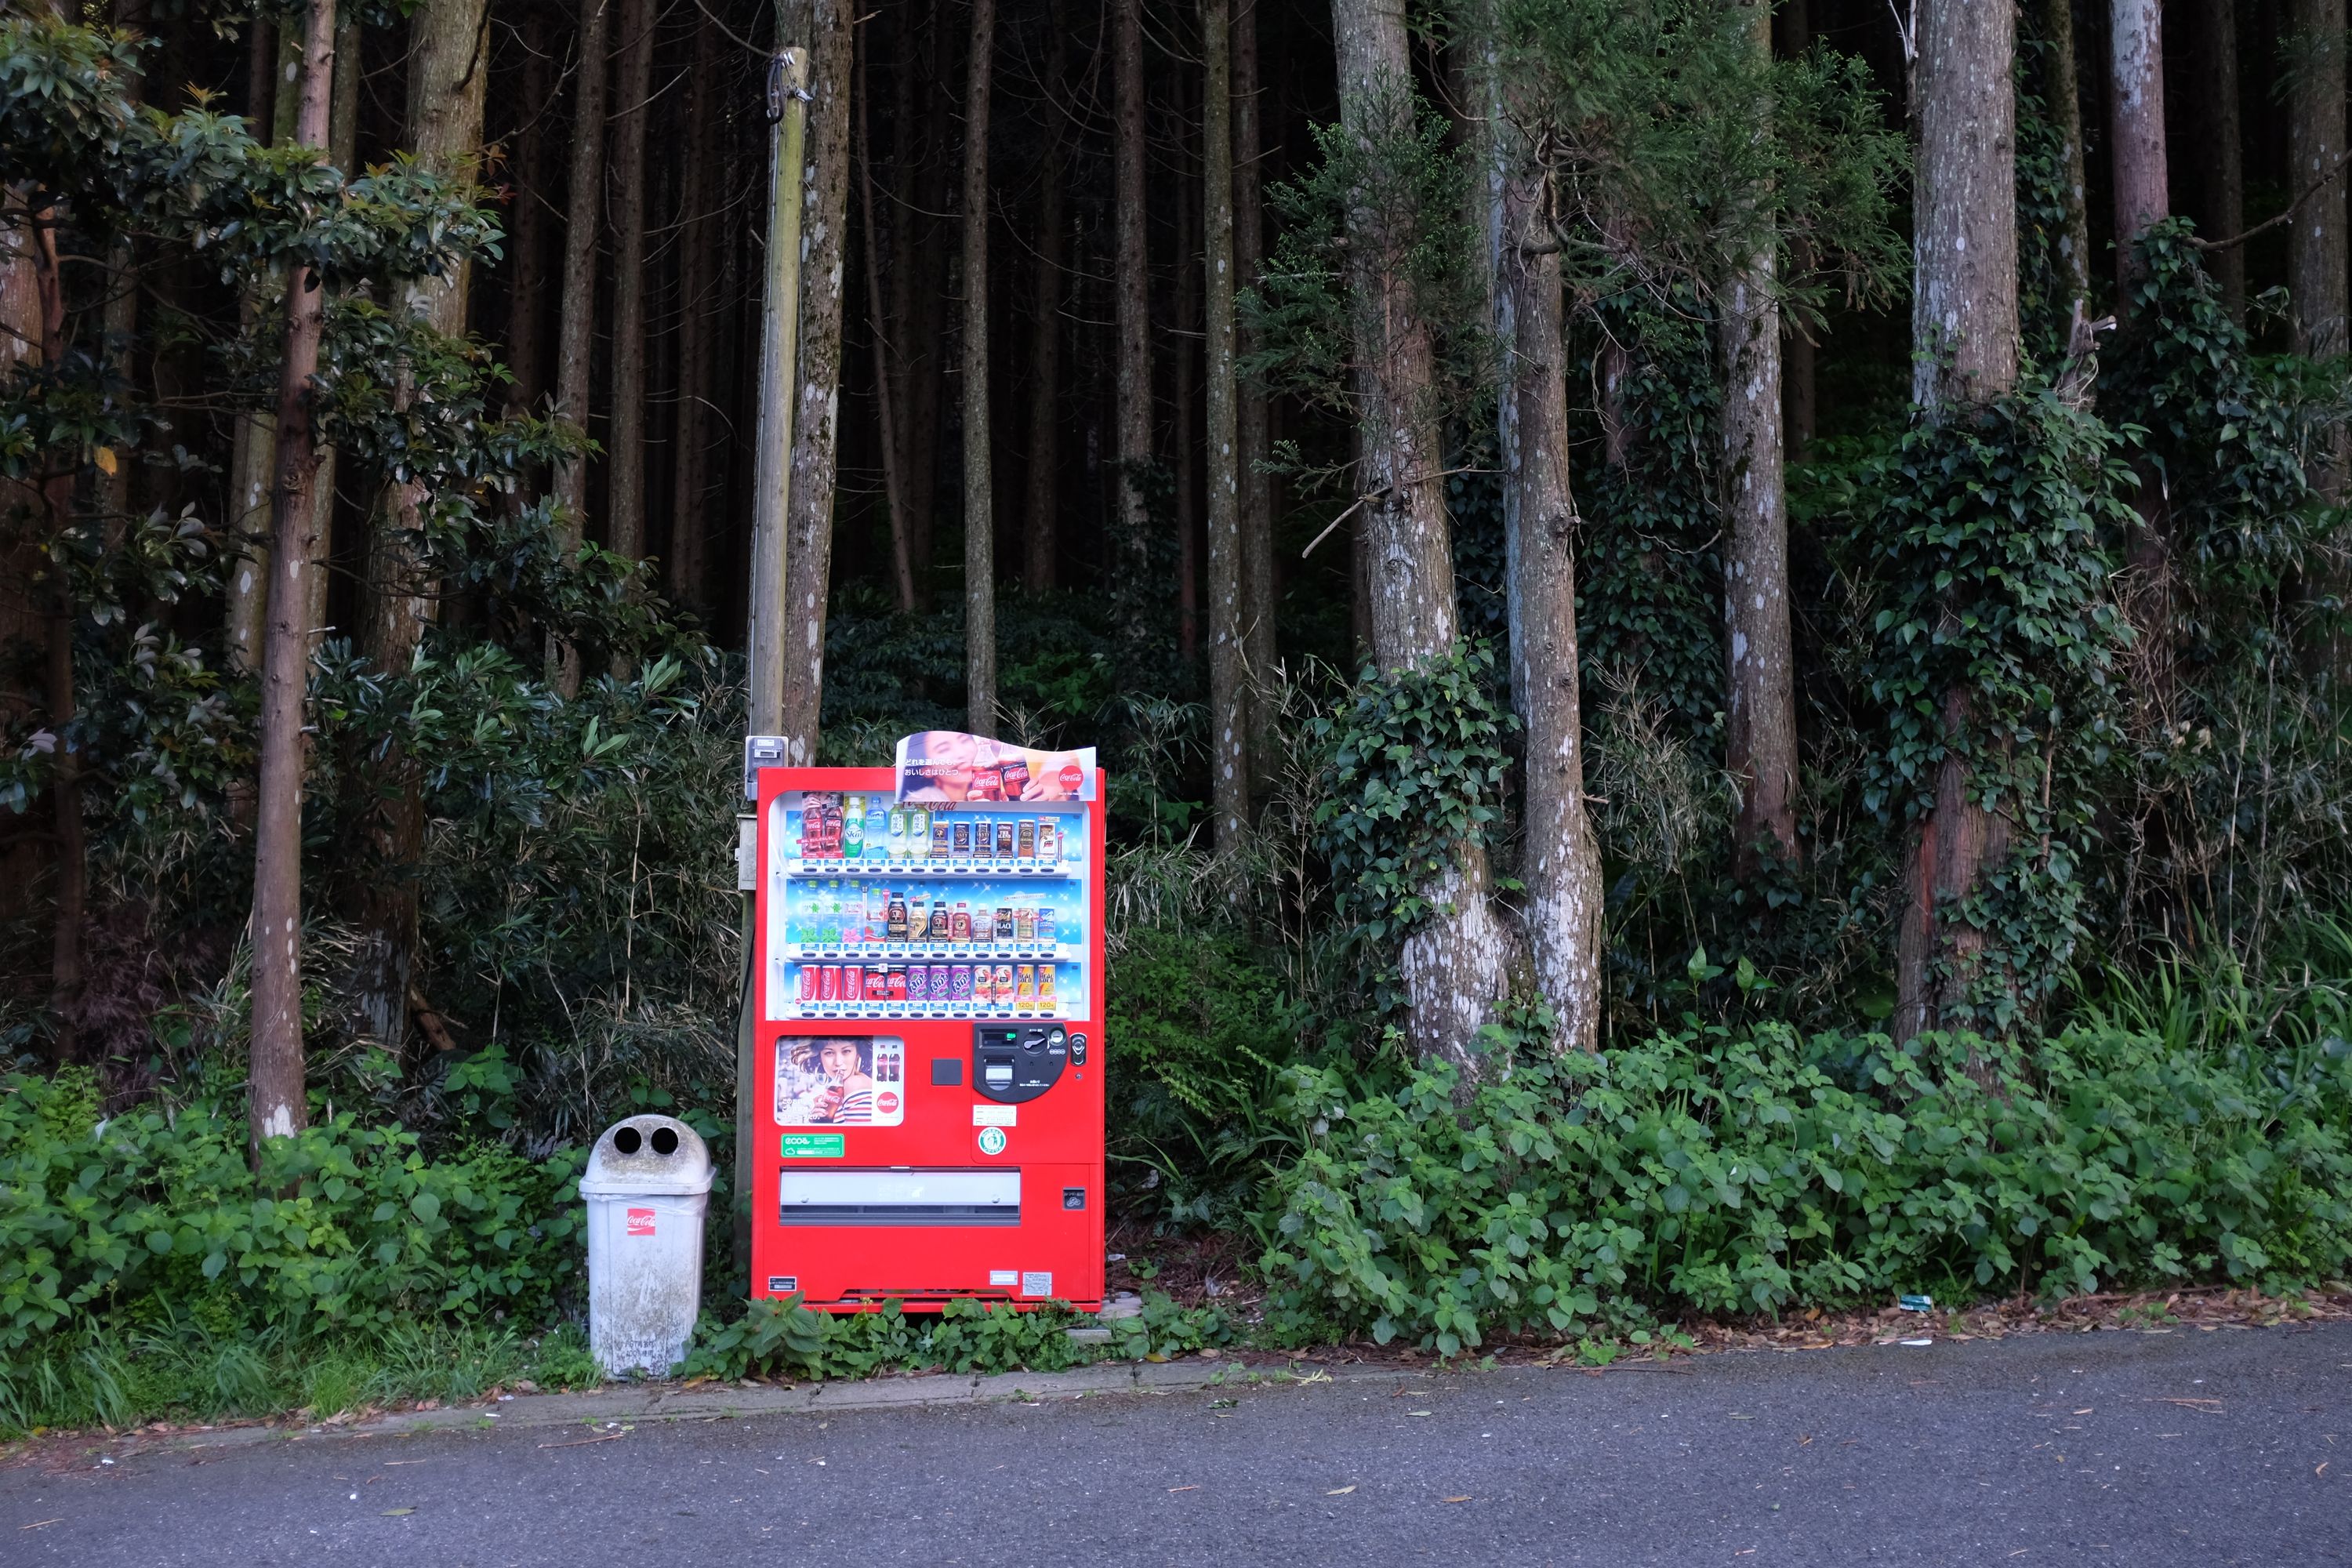 A red vending machine at the edge of a forest.